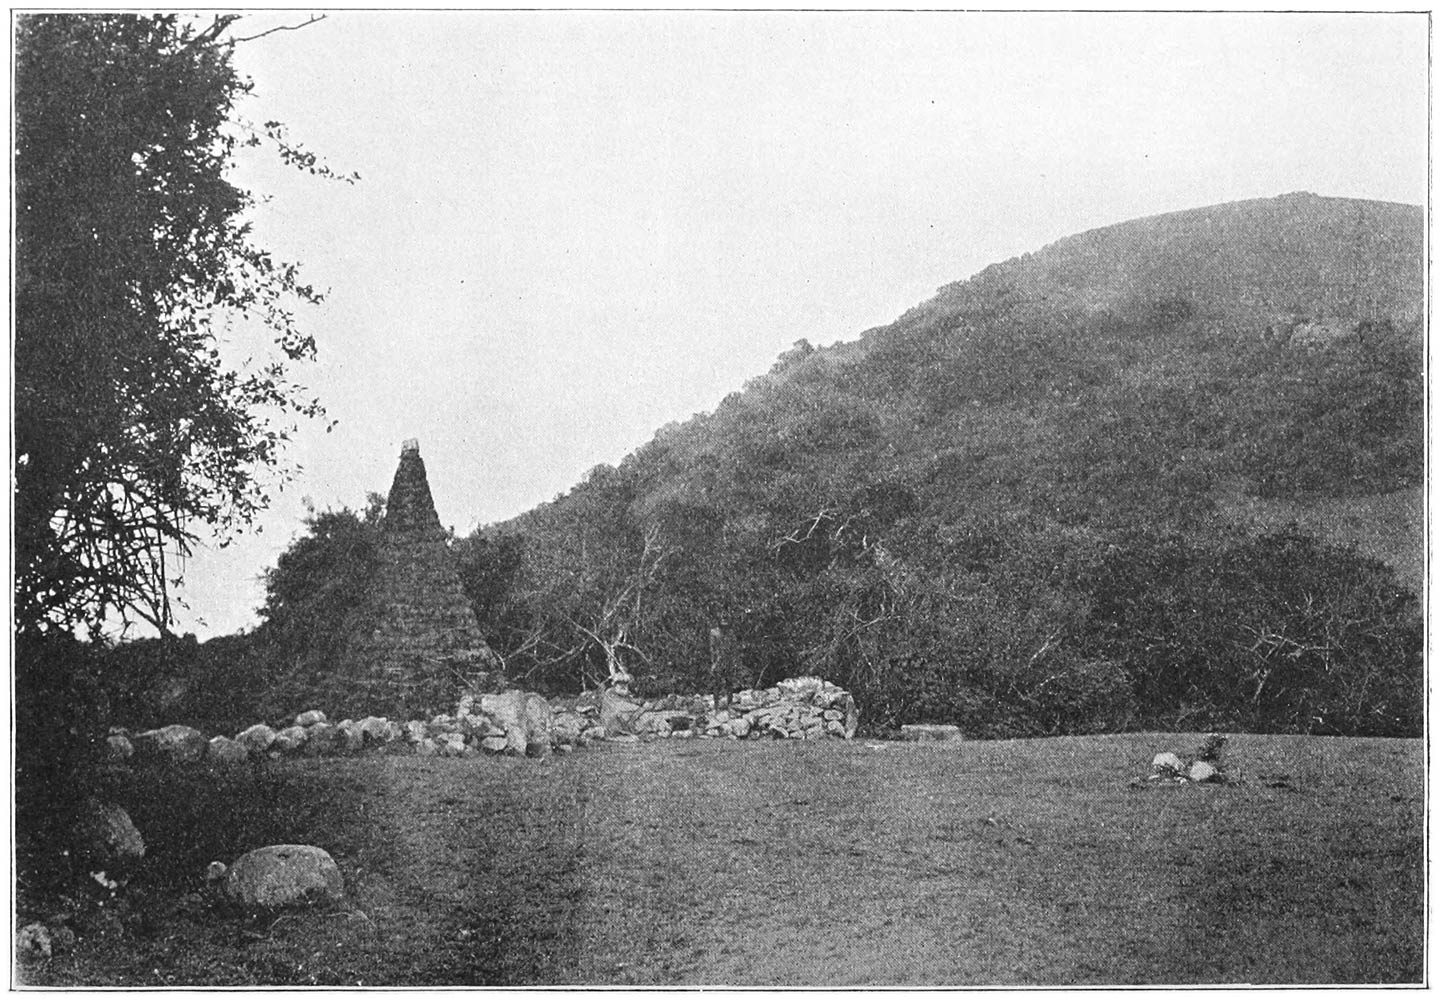 FIG. 13.—THE CONICAL DAIRY OF NÒDRS. THE STONE AT THE RIGHT-HAND END OF THE WALL IS THE ‘TEIDRTOLKARS’ (see p. 439).